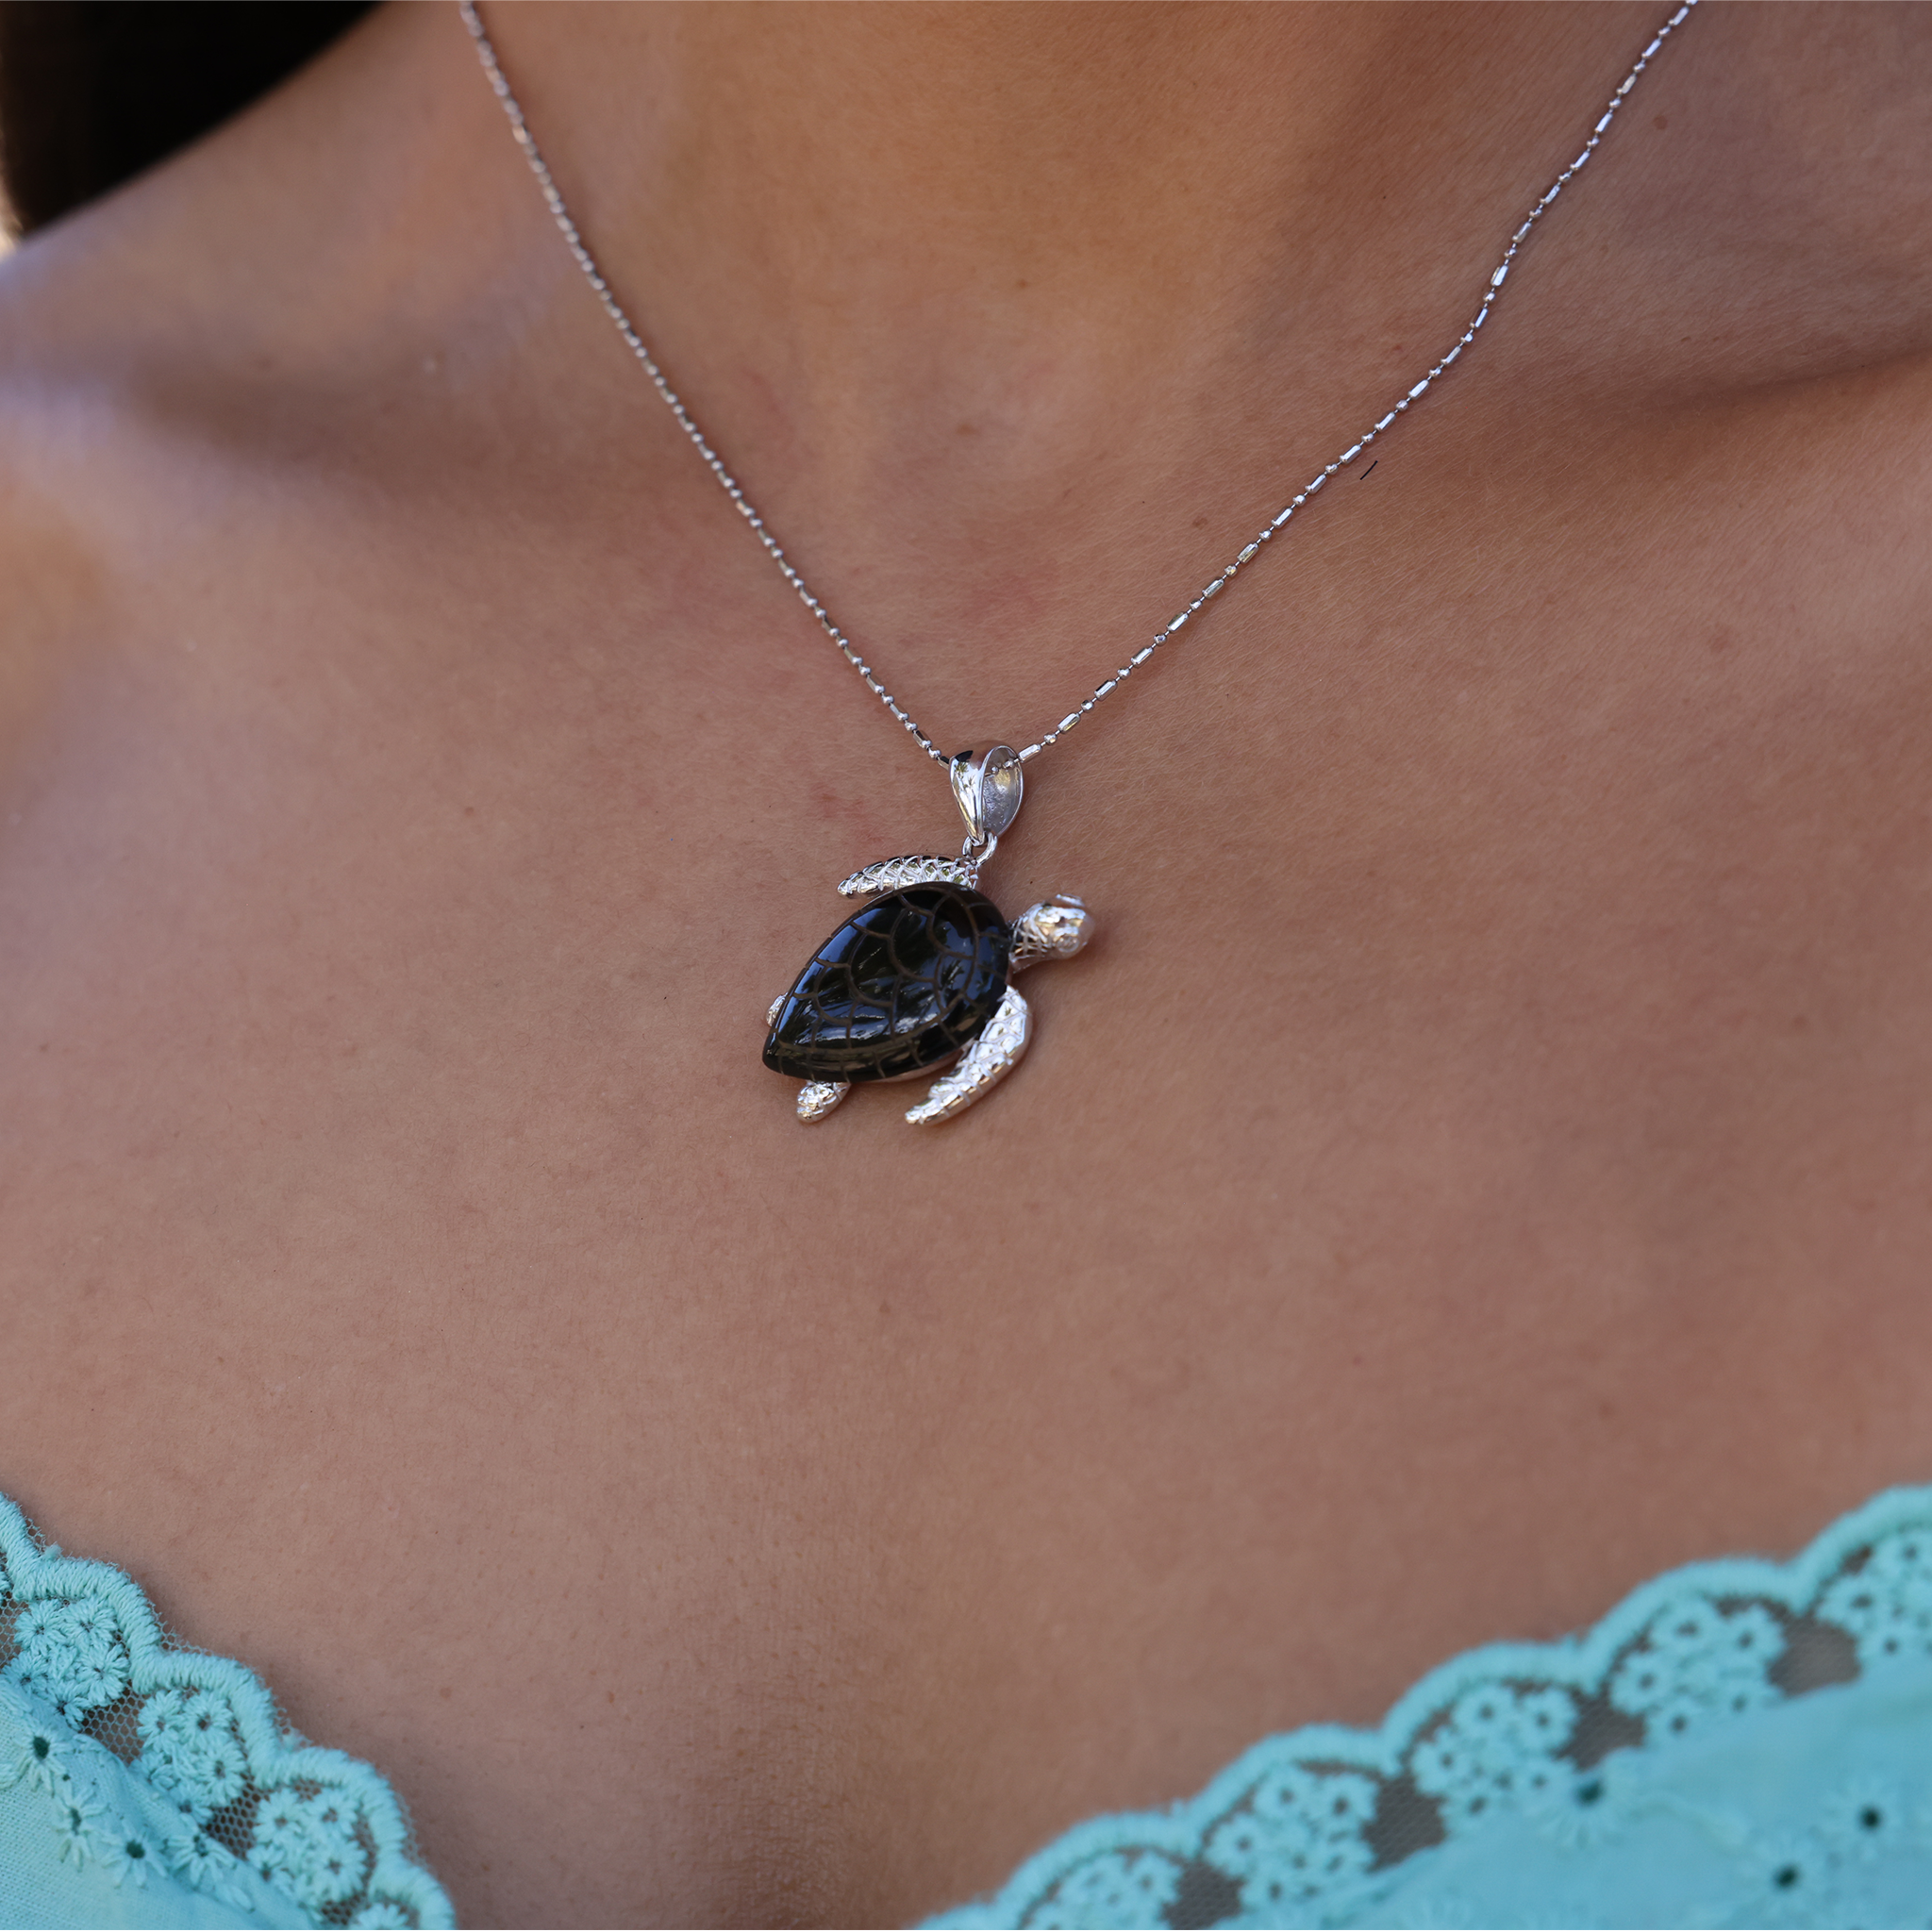 Maui Divers Jewelry Honu Black Coral Pendant in White Gold with Diamonds - 26mm on Chest with Teal Shirt